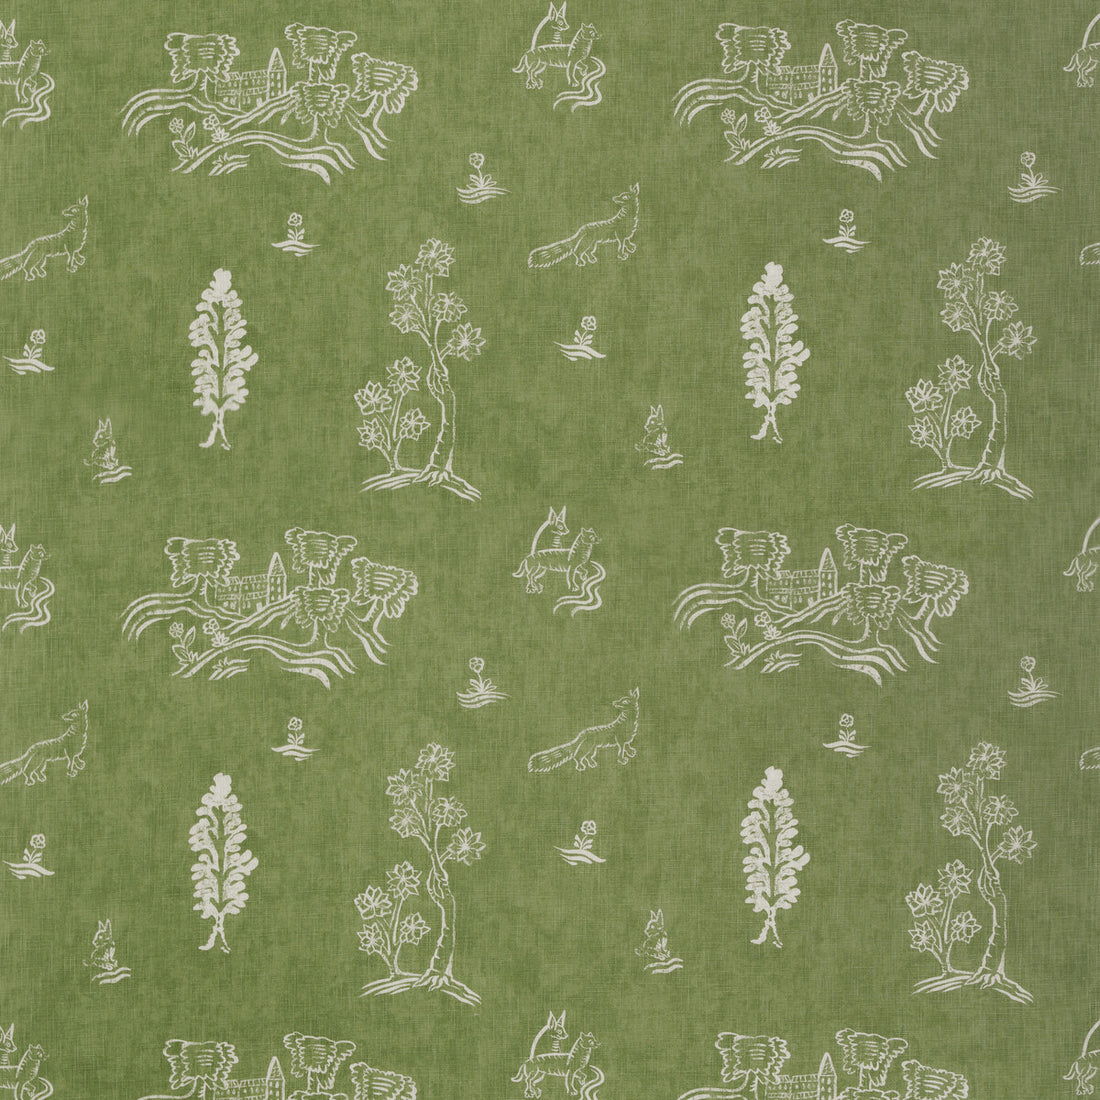 Friendly Folk fabric in basil green color - pattern AM100318.3.0 - by Kravet Couture in the Andrew Martin Kit Kemp collection